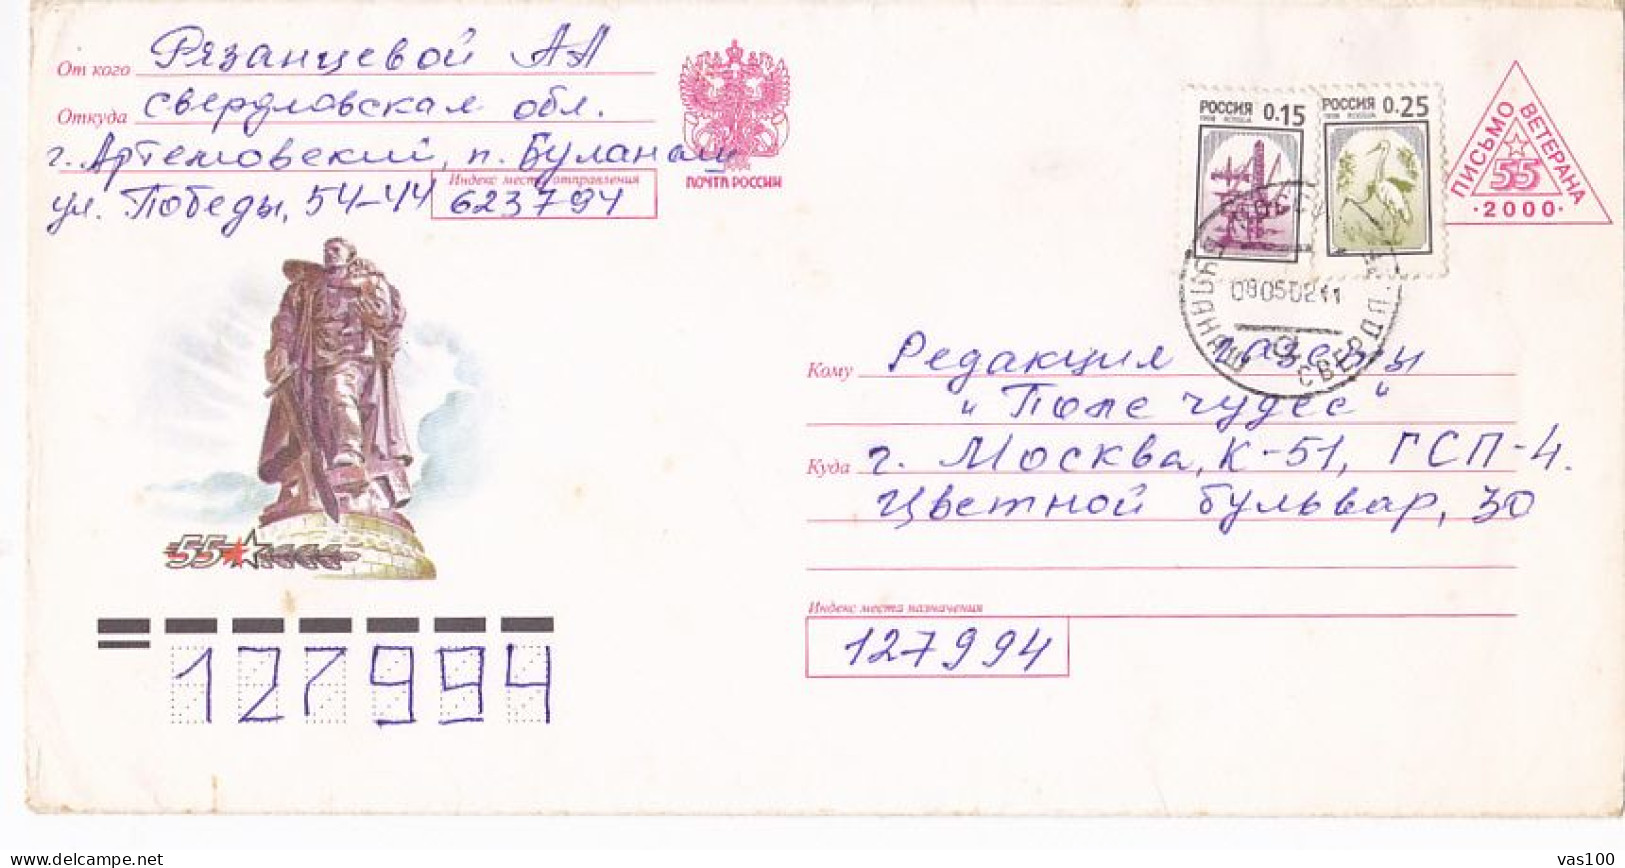 END OF WW2 ANNIVERSARY, MONUMENT, COVER STATIONERY, ENTIER POSTAL, 2000, RUSSIA - Ganzsachen